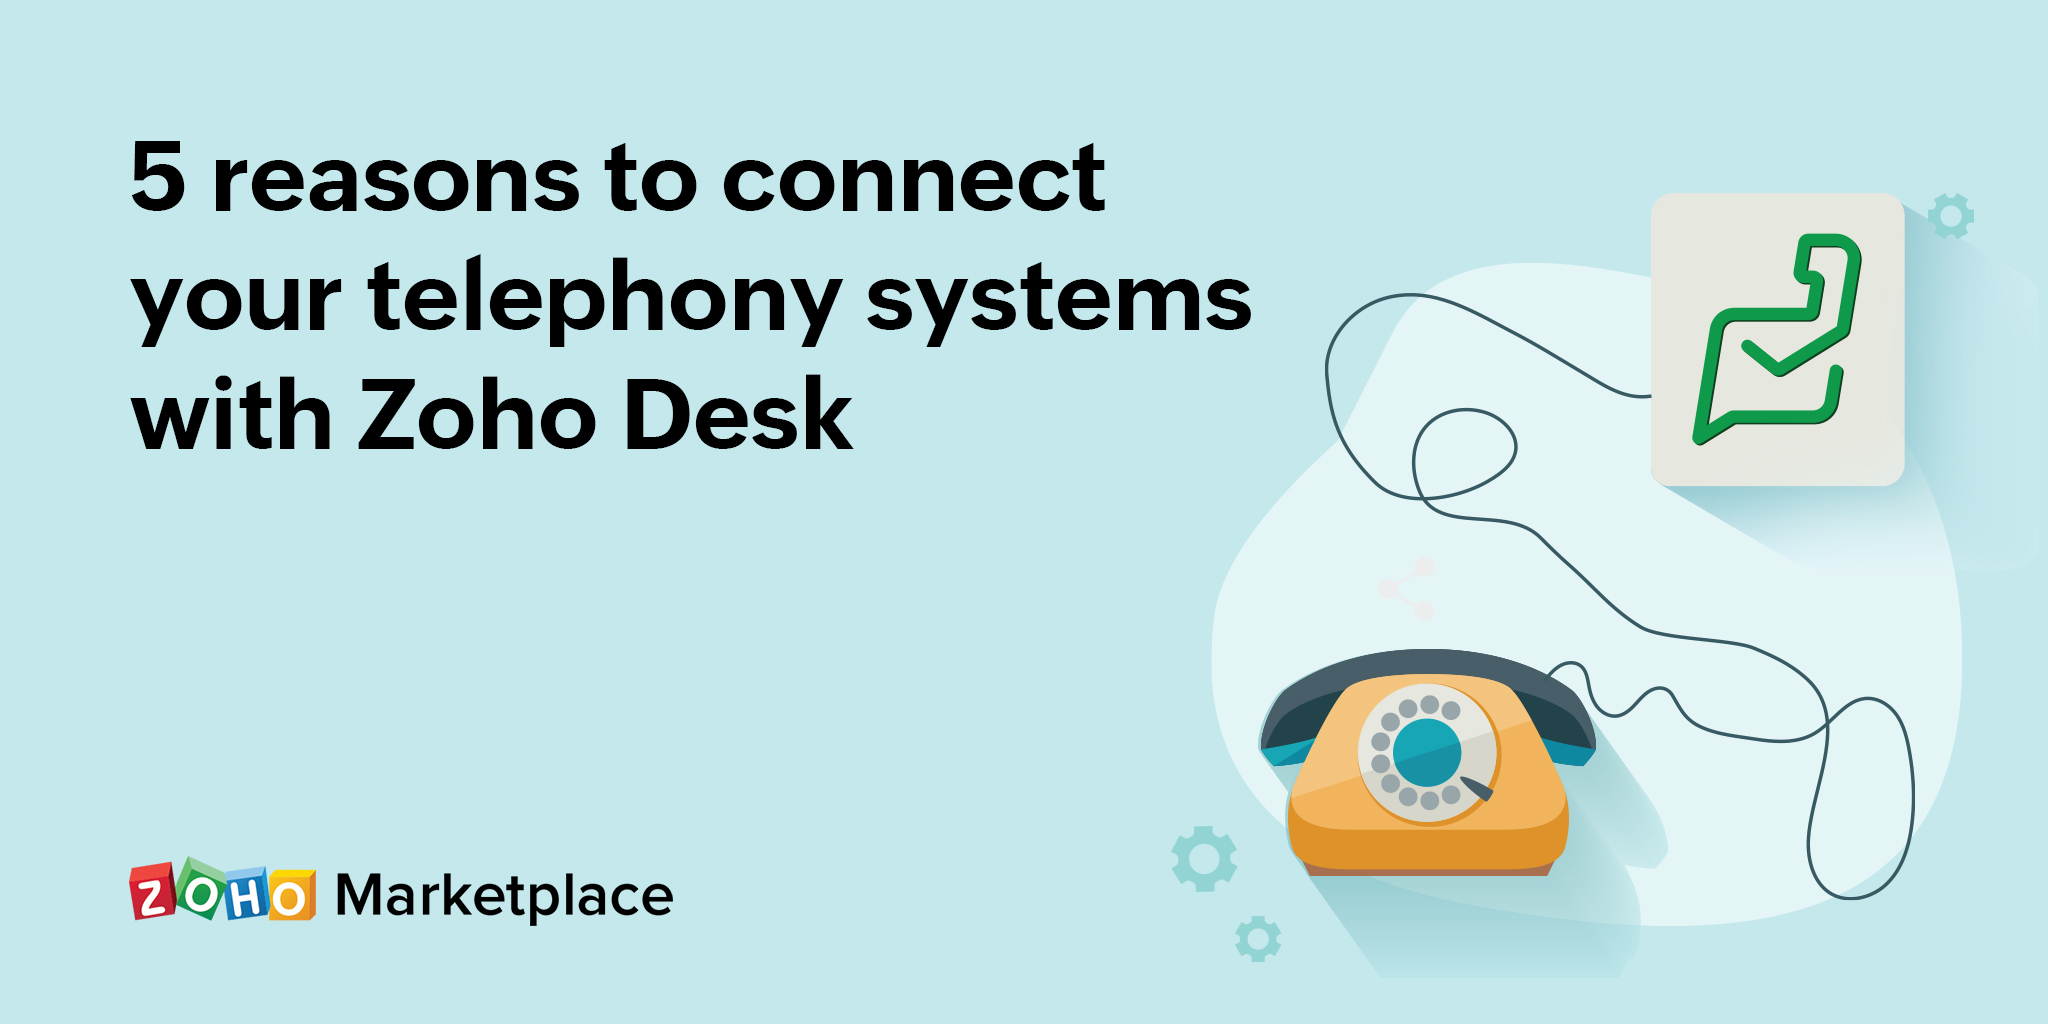 5 reasons to connect your telephony systems with Zoho Desk